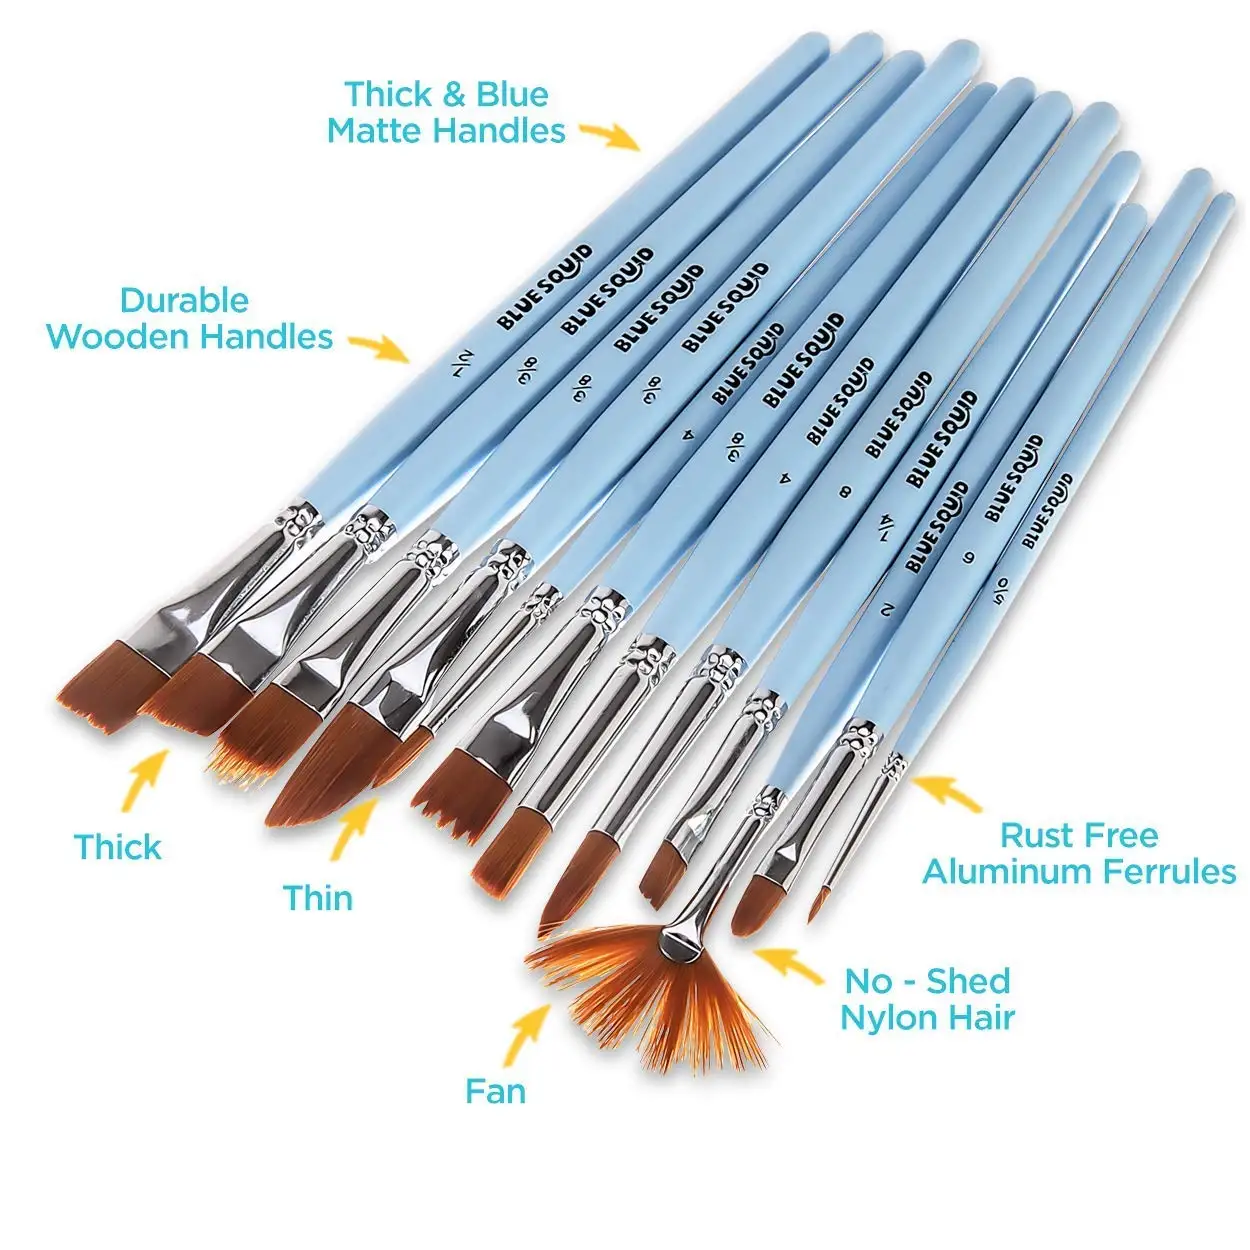 Watercolor Brushes Paint Brush Set - by Blue Squid, 12 Artist